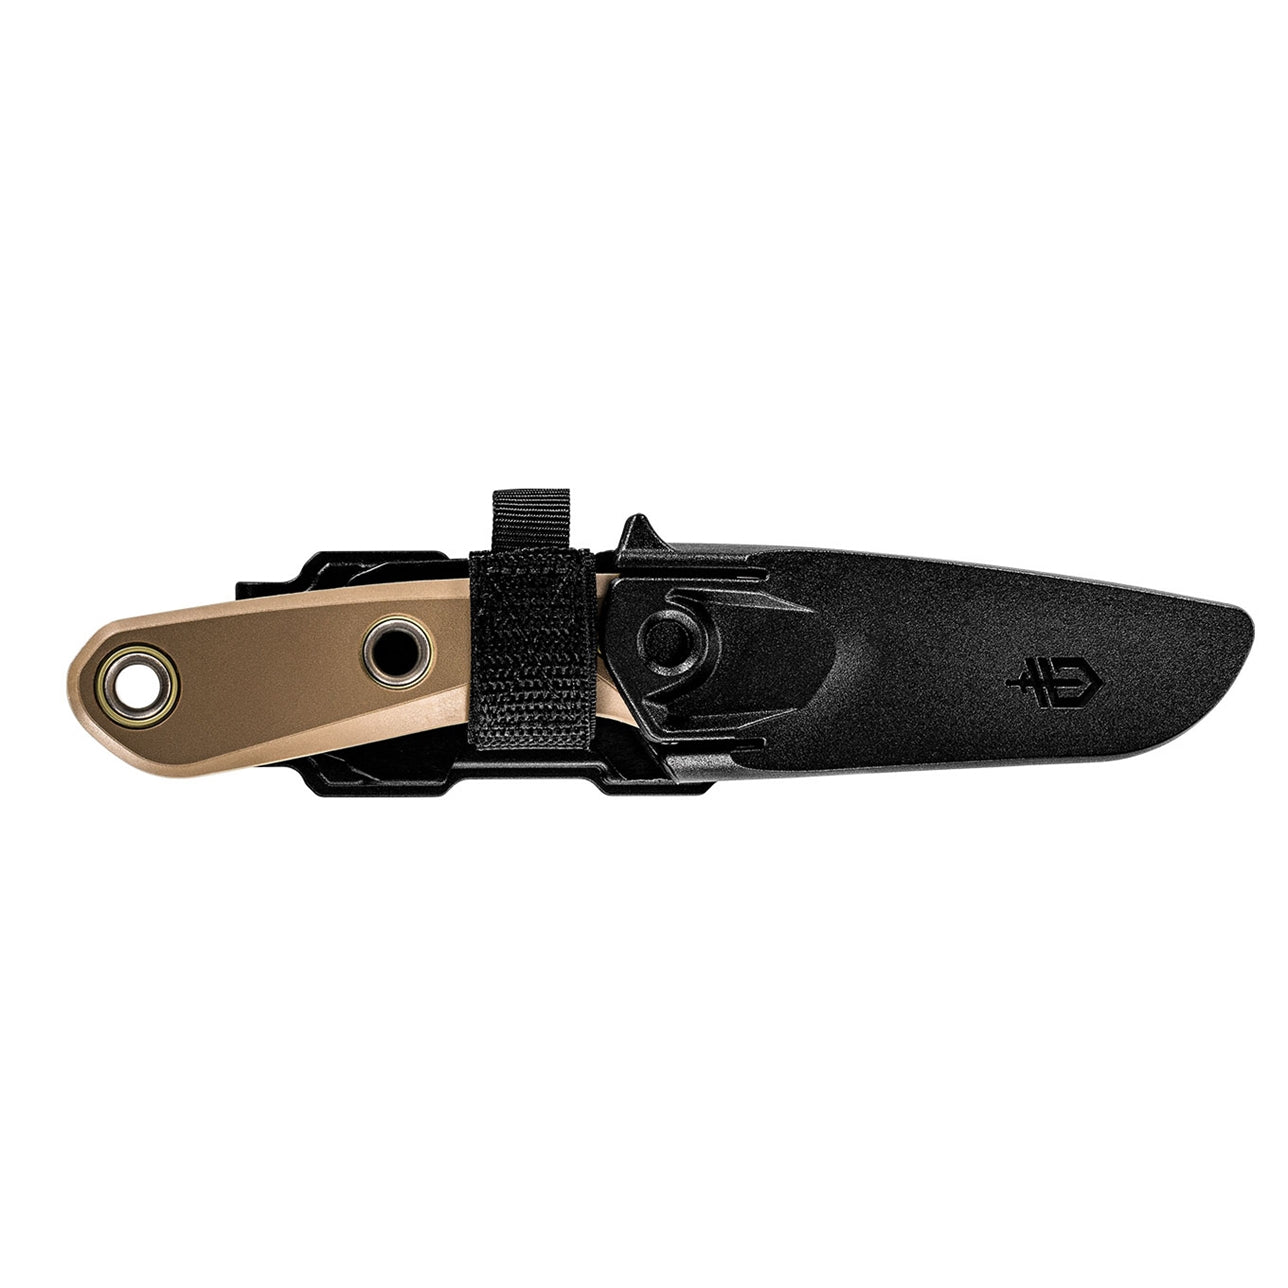 gerber bushcraft fixed blade custom knife for sale in austin texas at hawkes outdoors 2102512882